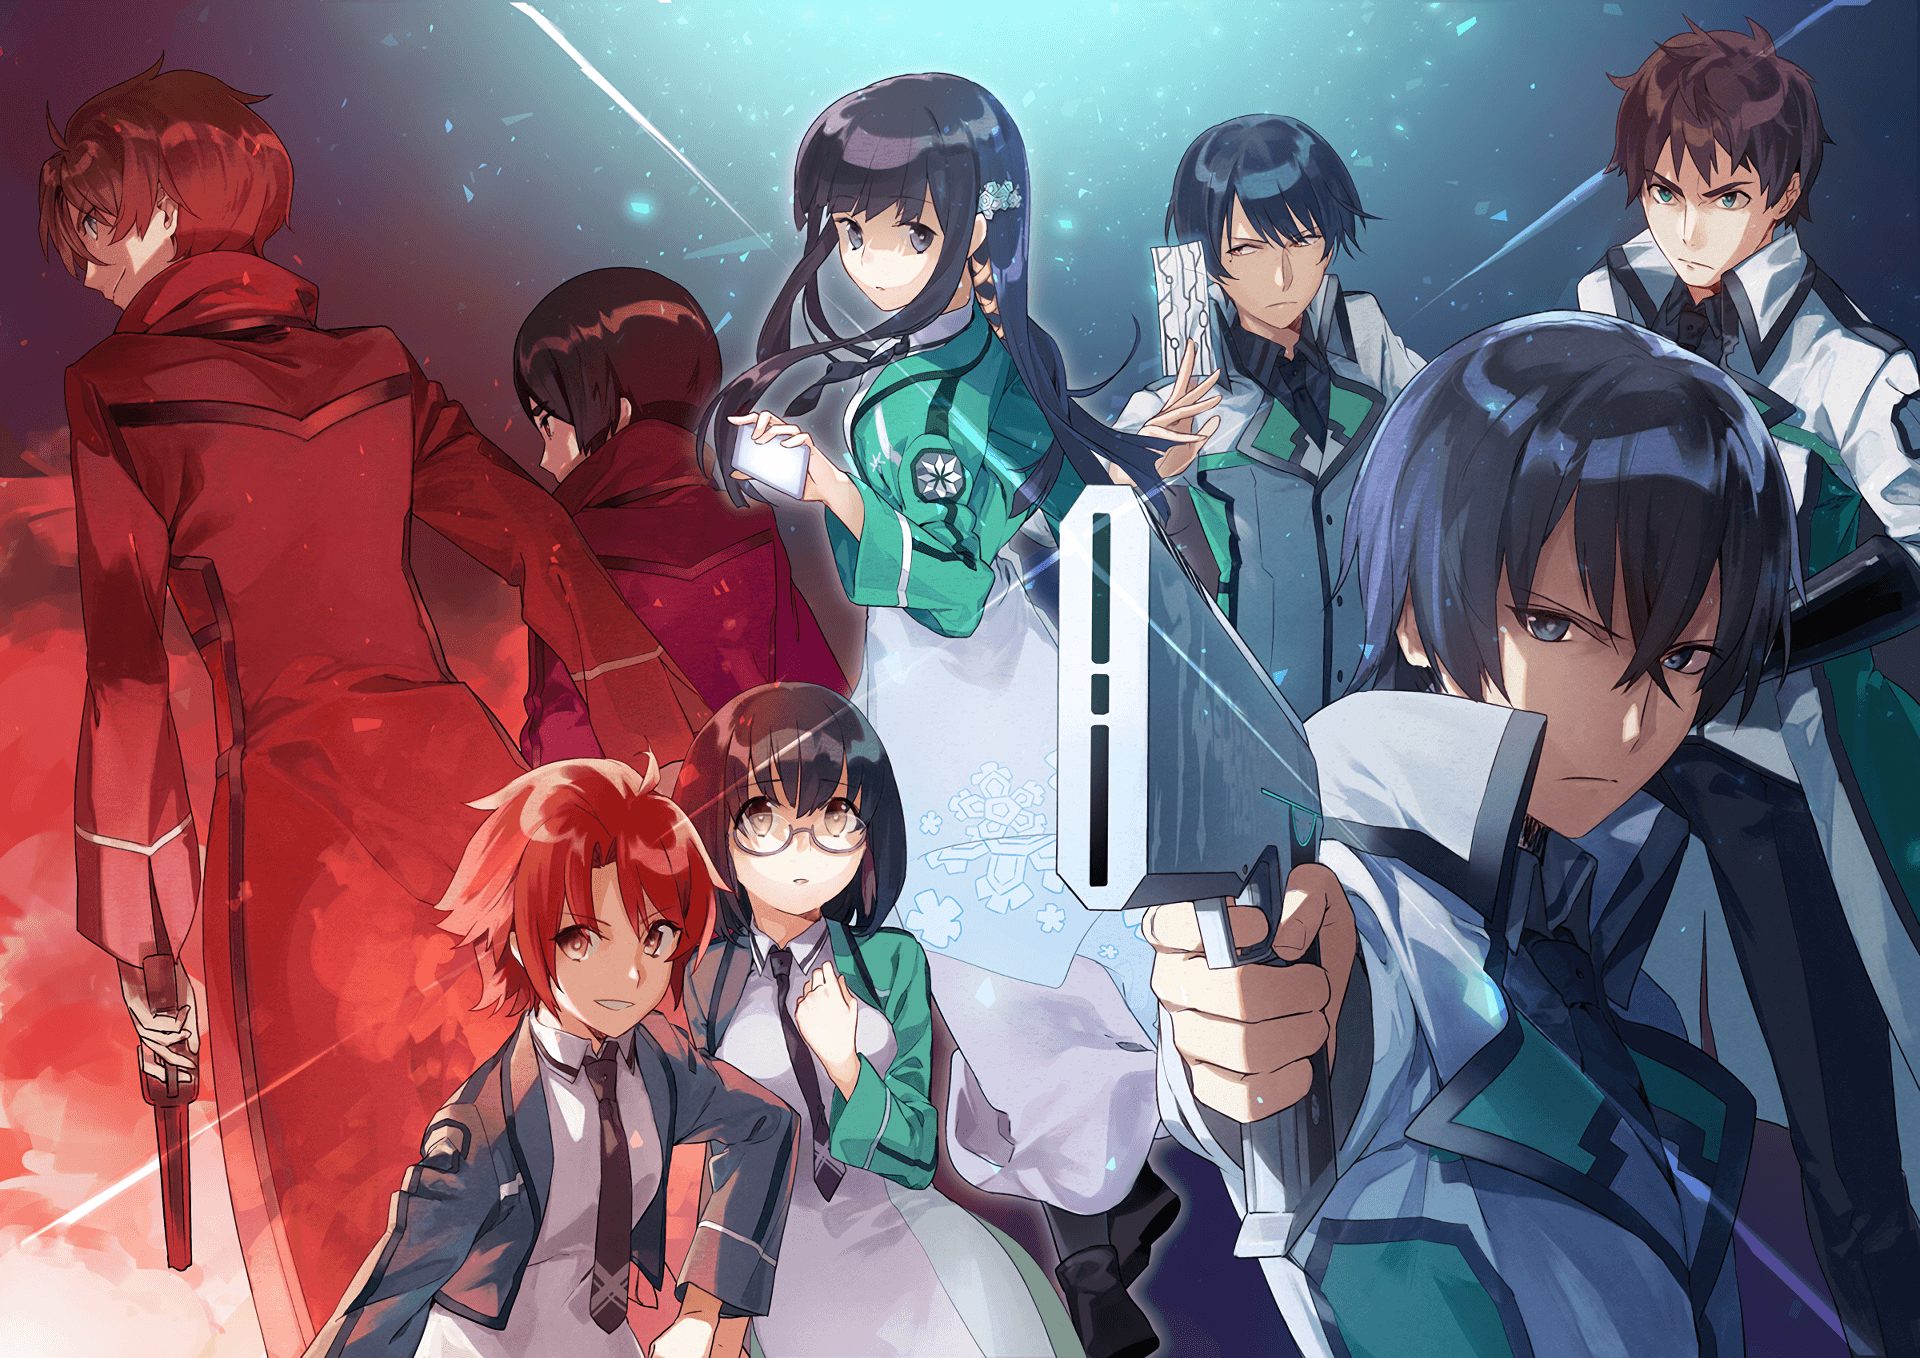 The South Sea Riots arc of the manga "Irregular at Magic High School" is concluded.